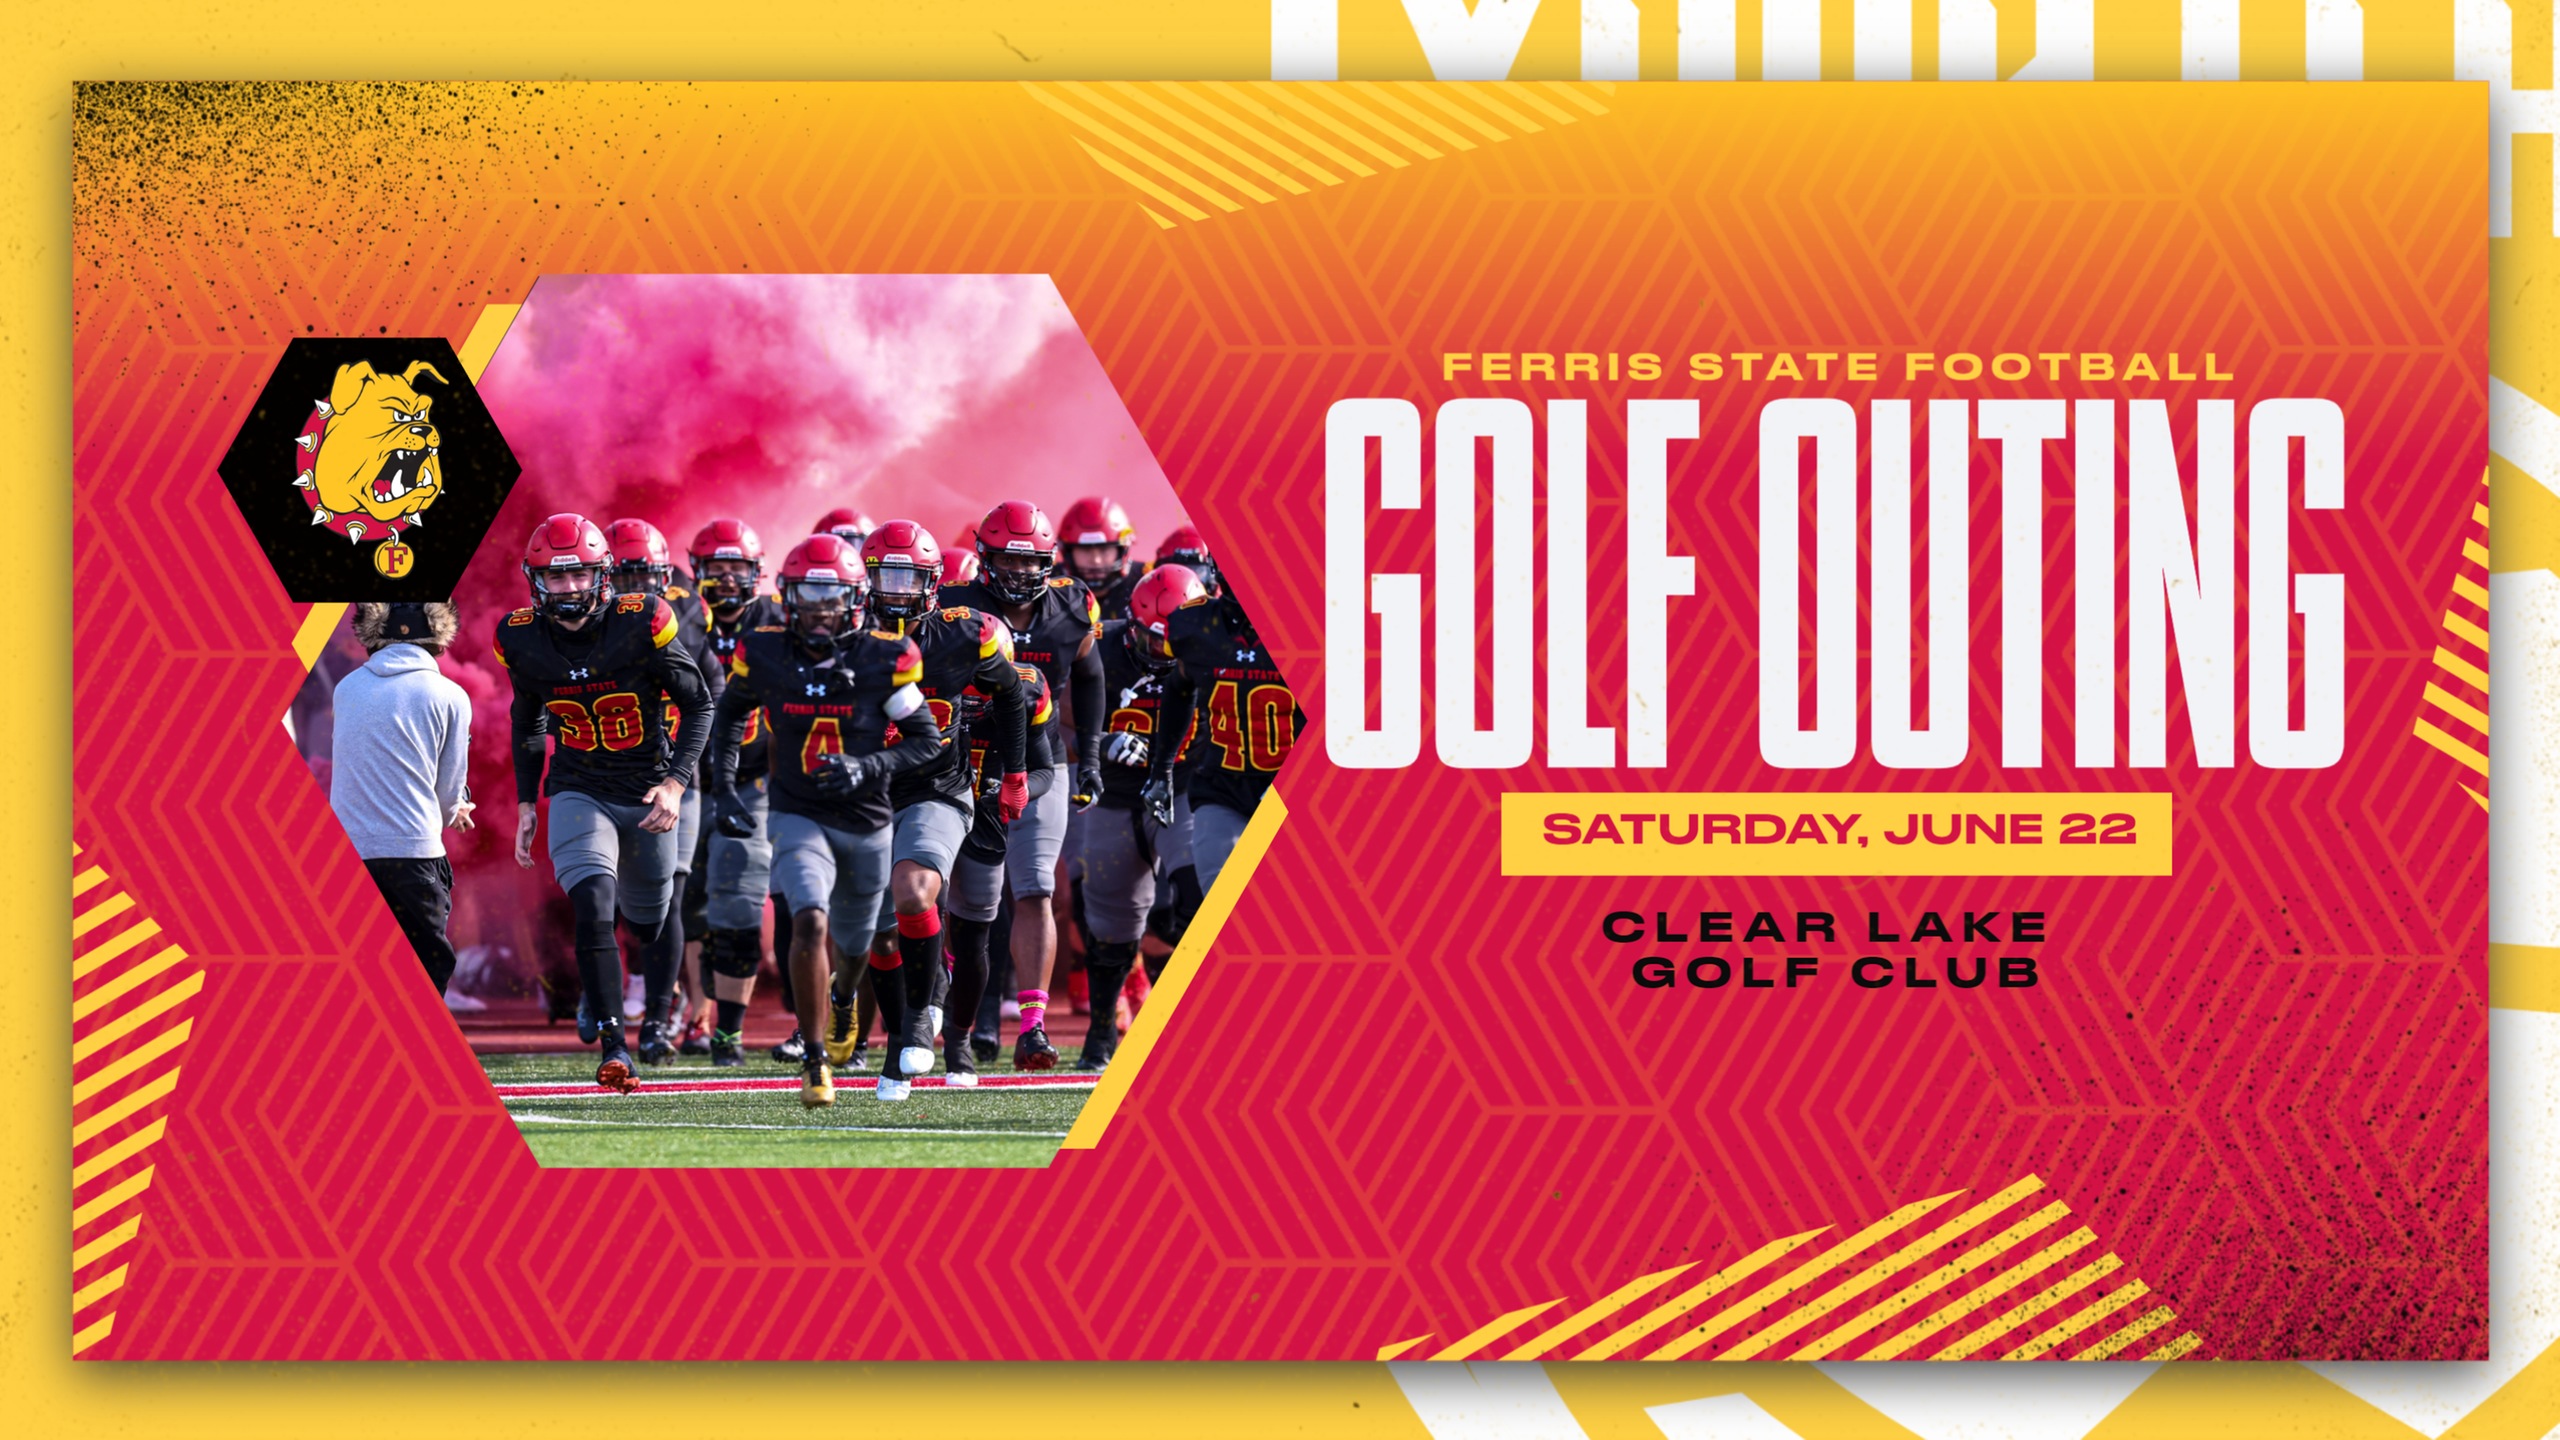 42nd Annual Ferris State Football Golf Outing Set For June 22; Sign Up Now!